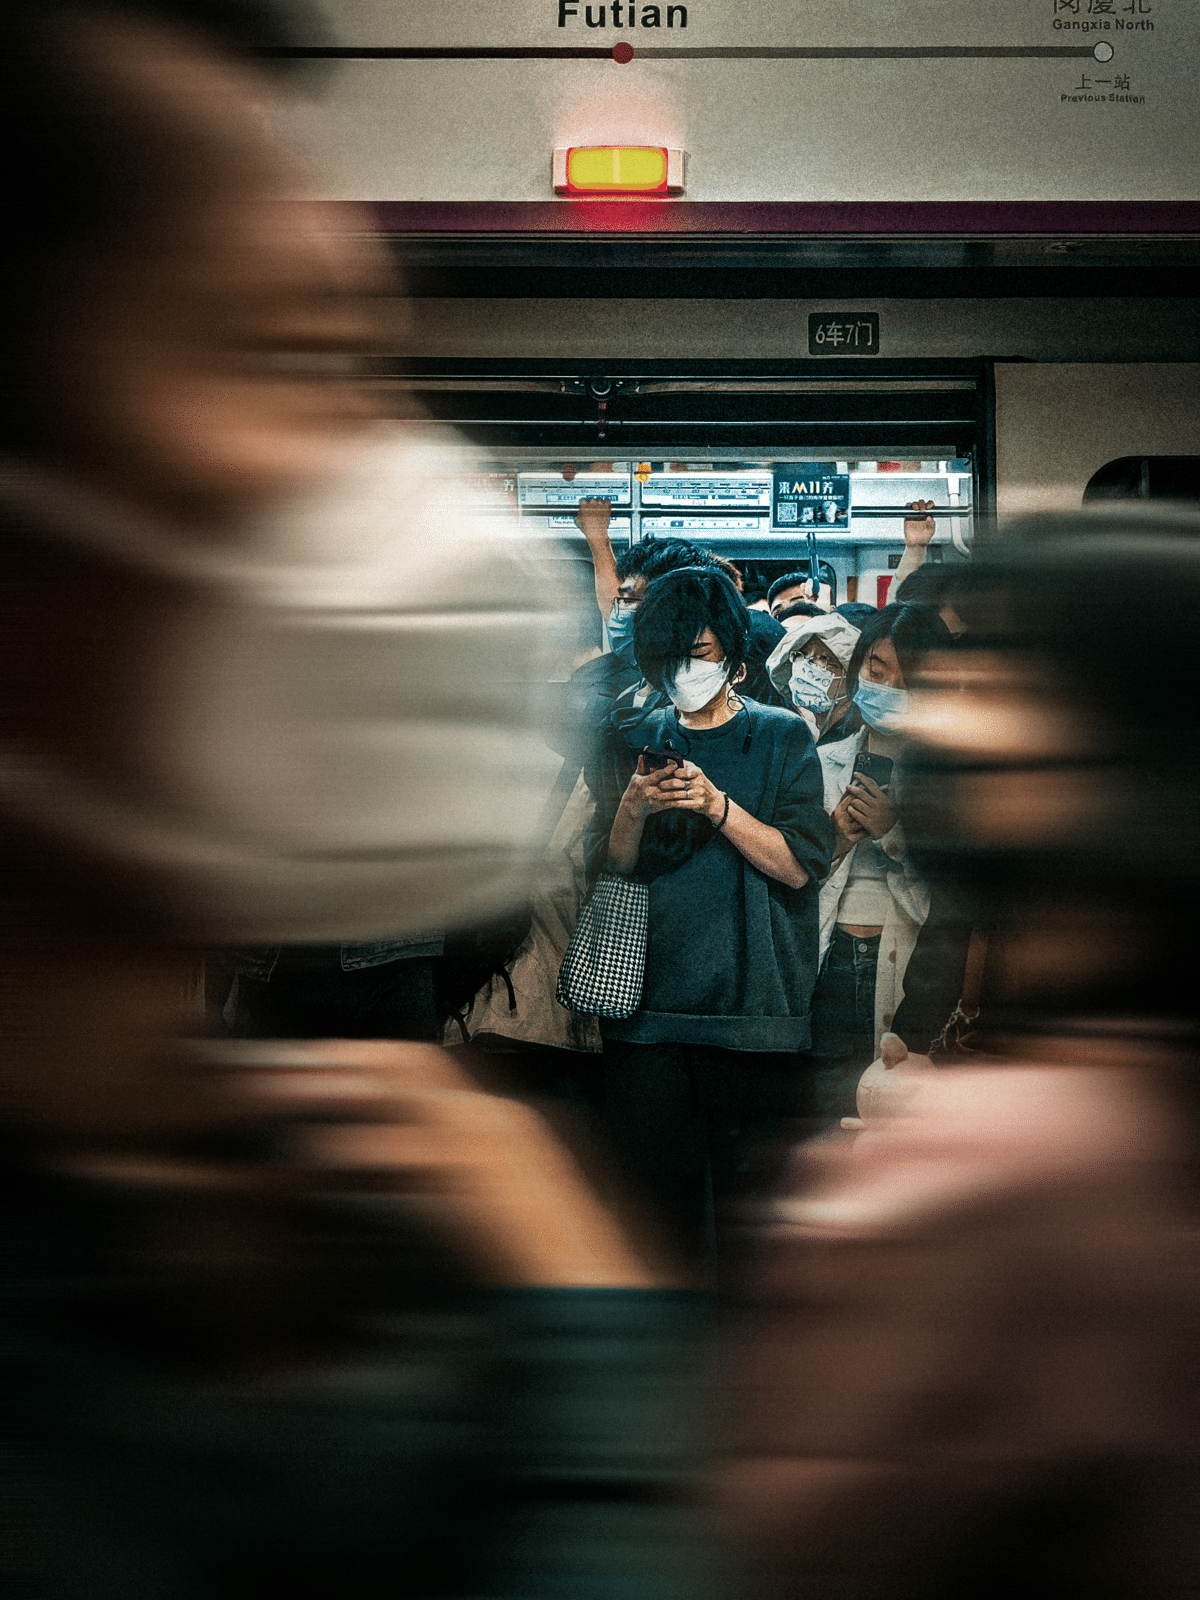 People crowded into the subway in Shenzen, China